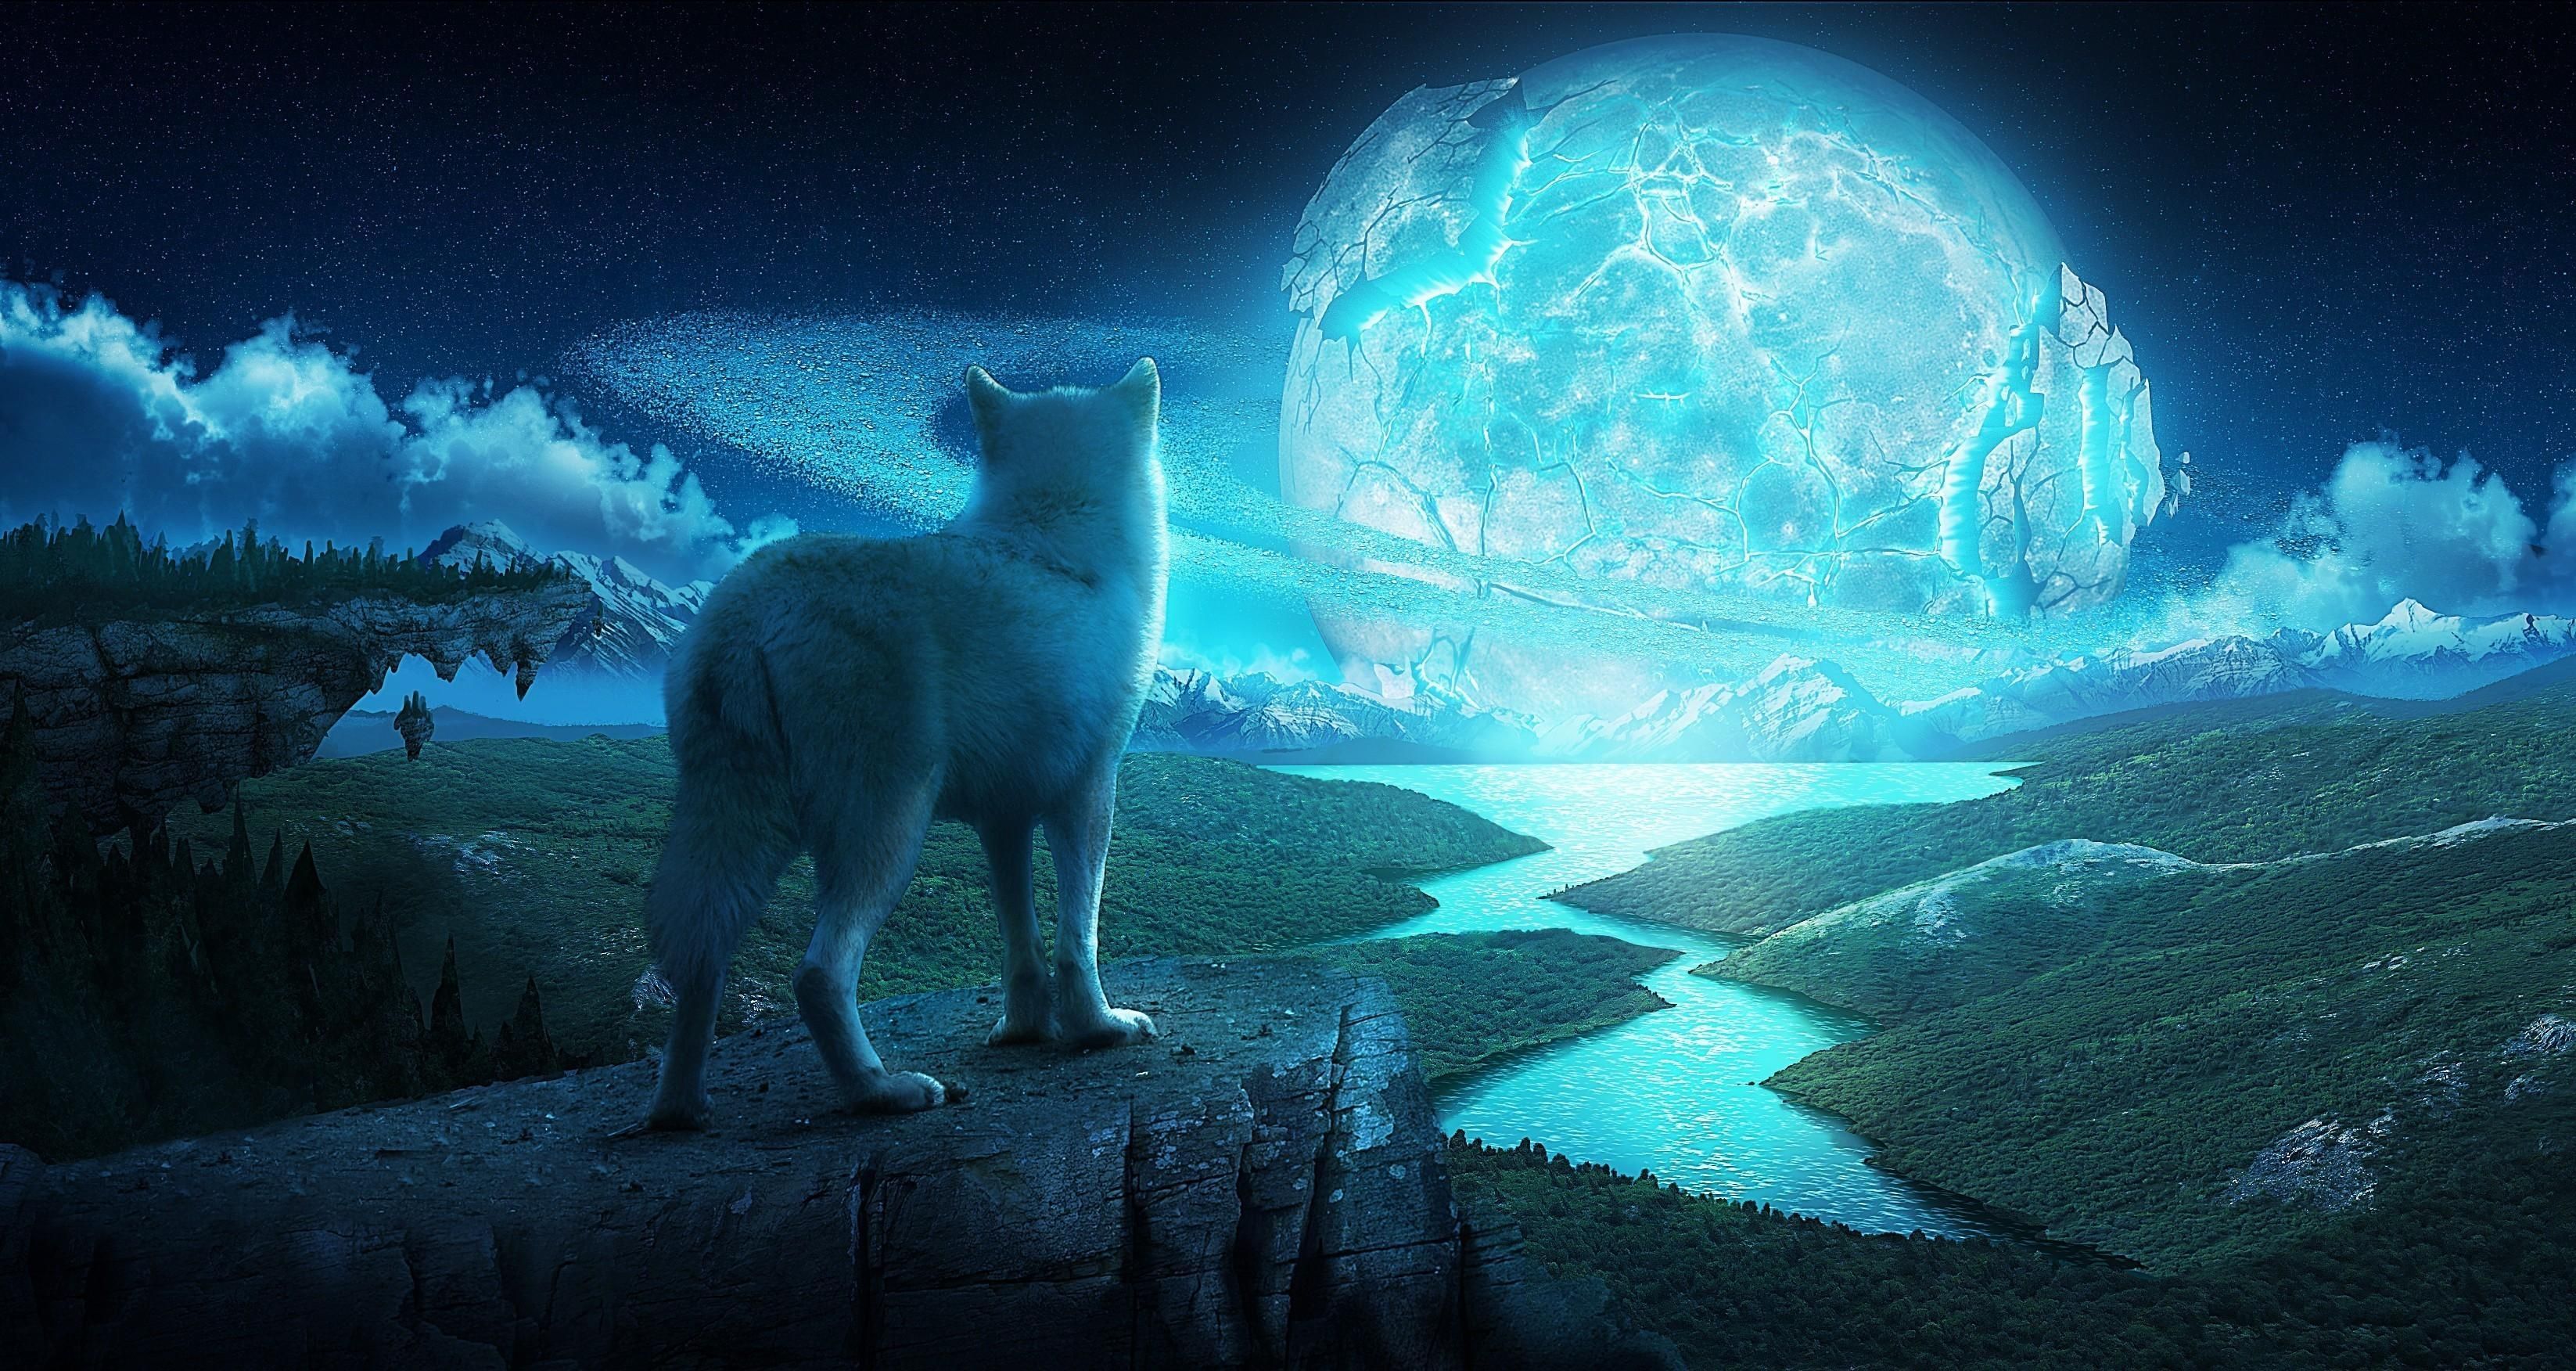 Magical Wolf. Wolf wallpaper, Wolf background, Fantasy wolf